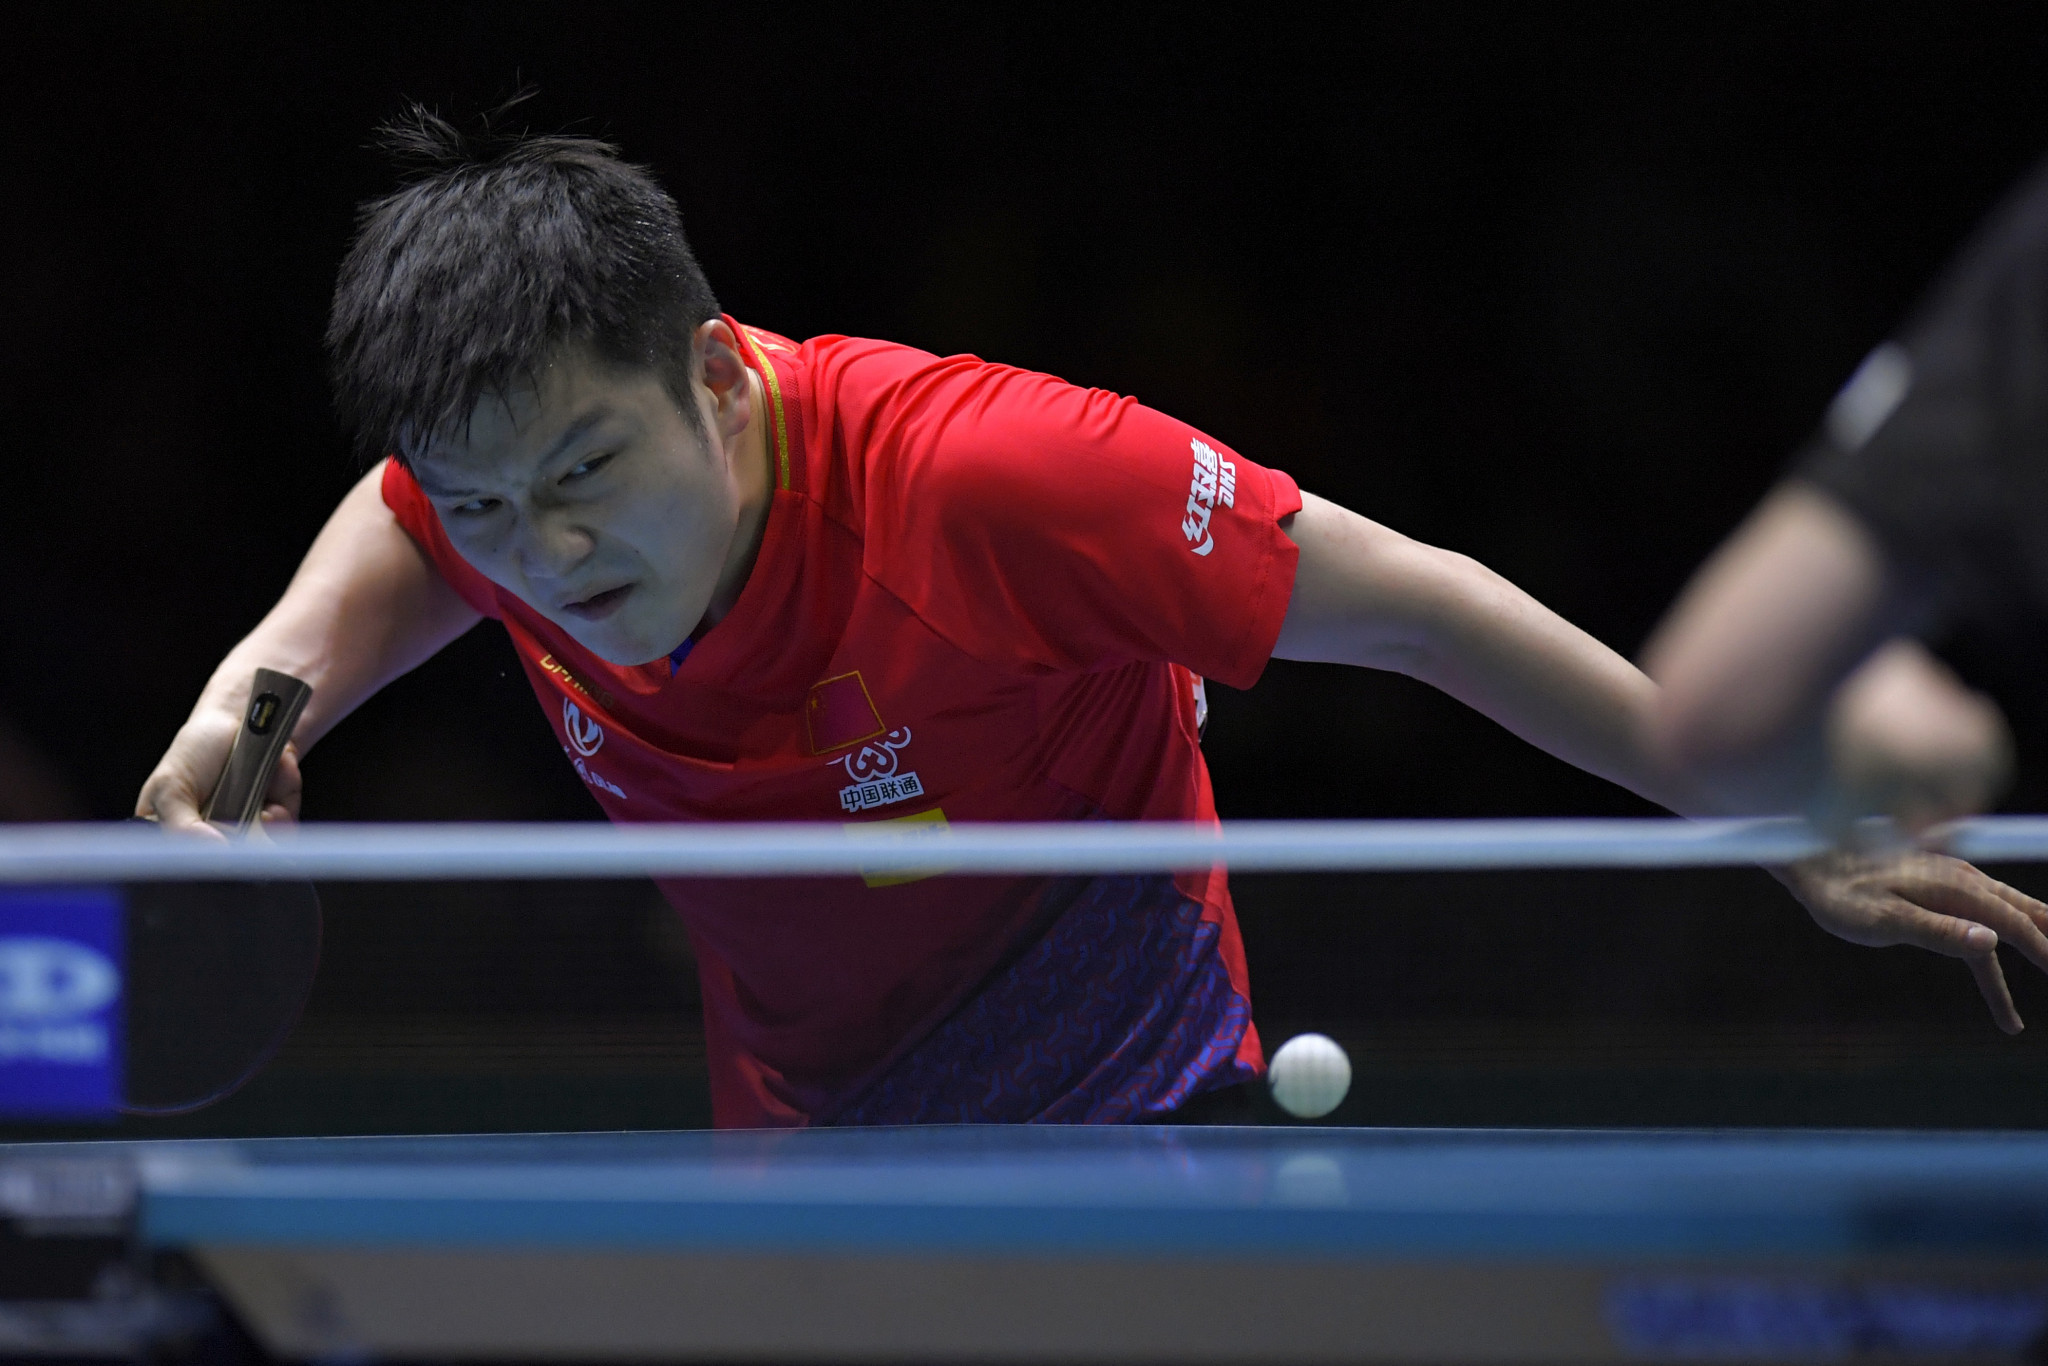 Fan Zhendong is eyeing a second title in a row in Austria ©Getty Images